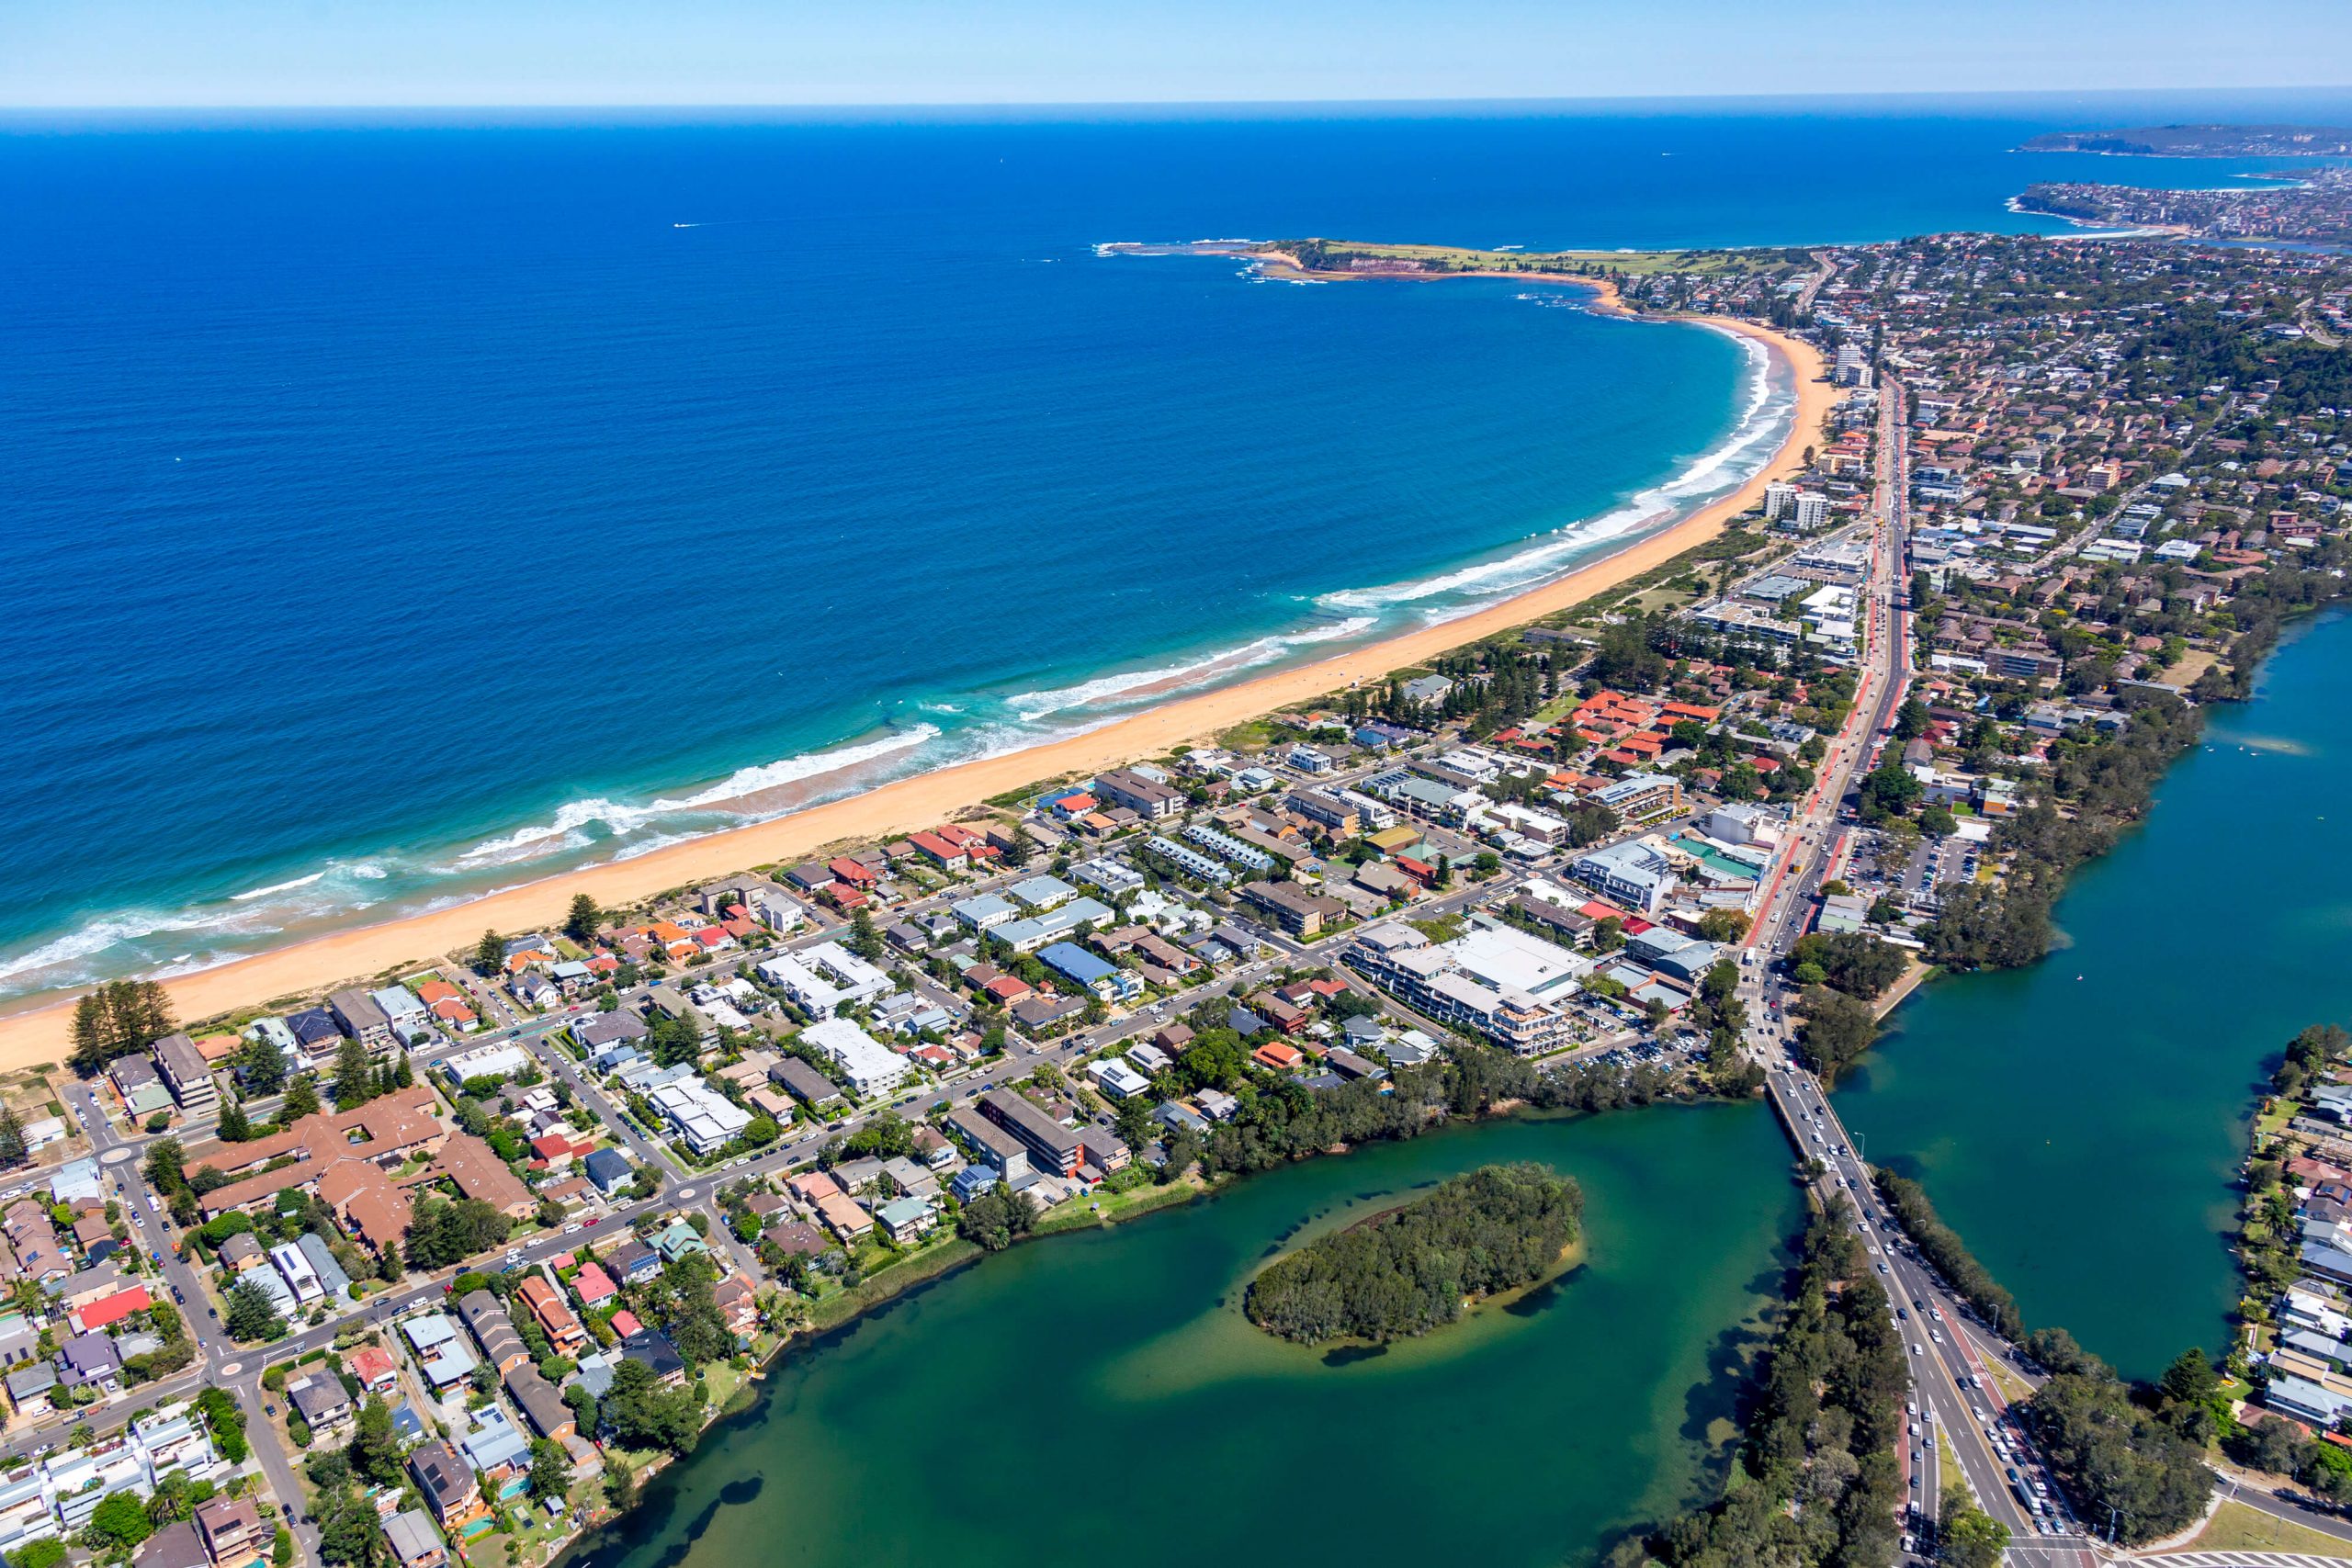 About Narrabeen